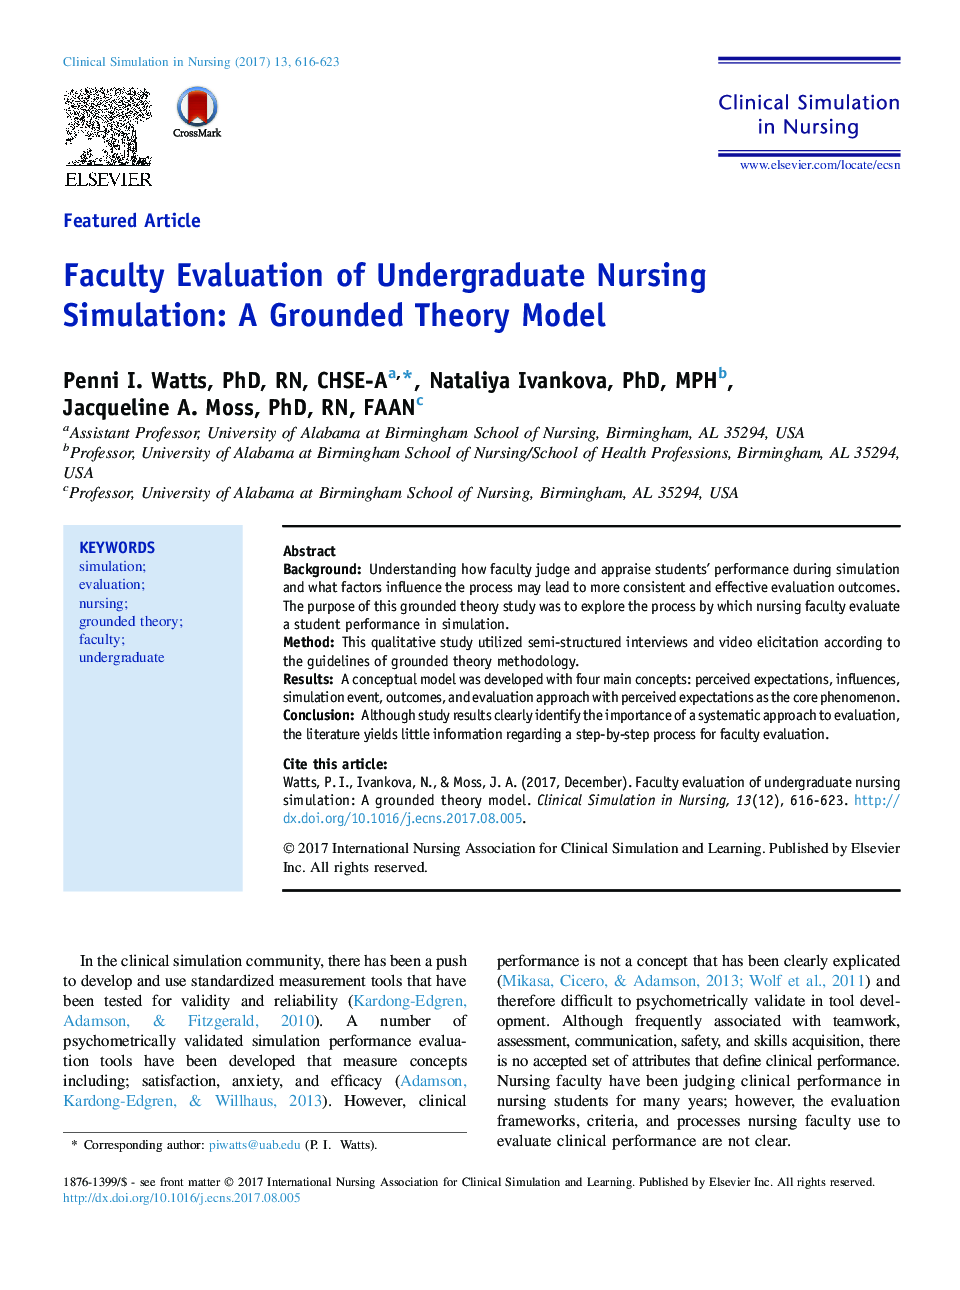 Faculty Evaluation of Undergraduate Nursing Simulation: A Grounded Theory Model